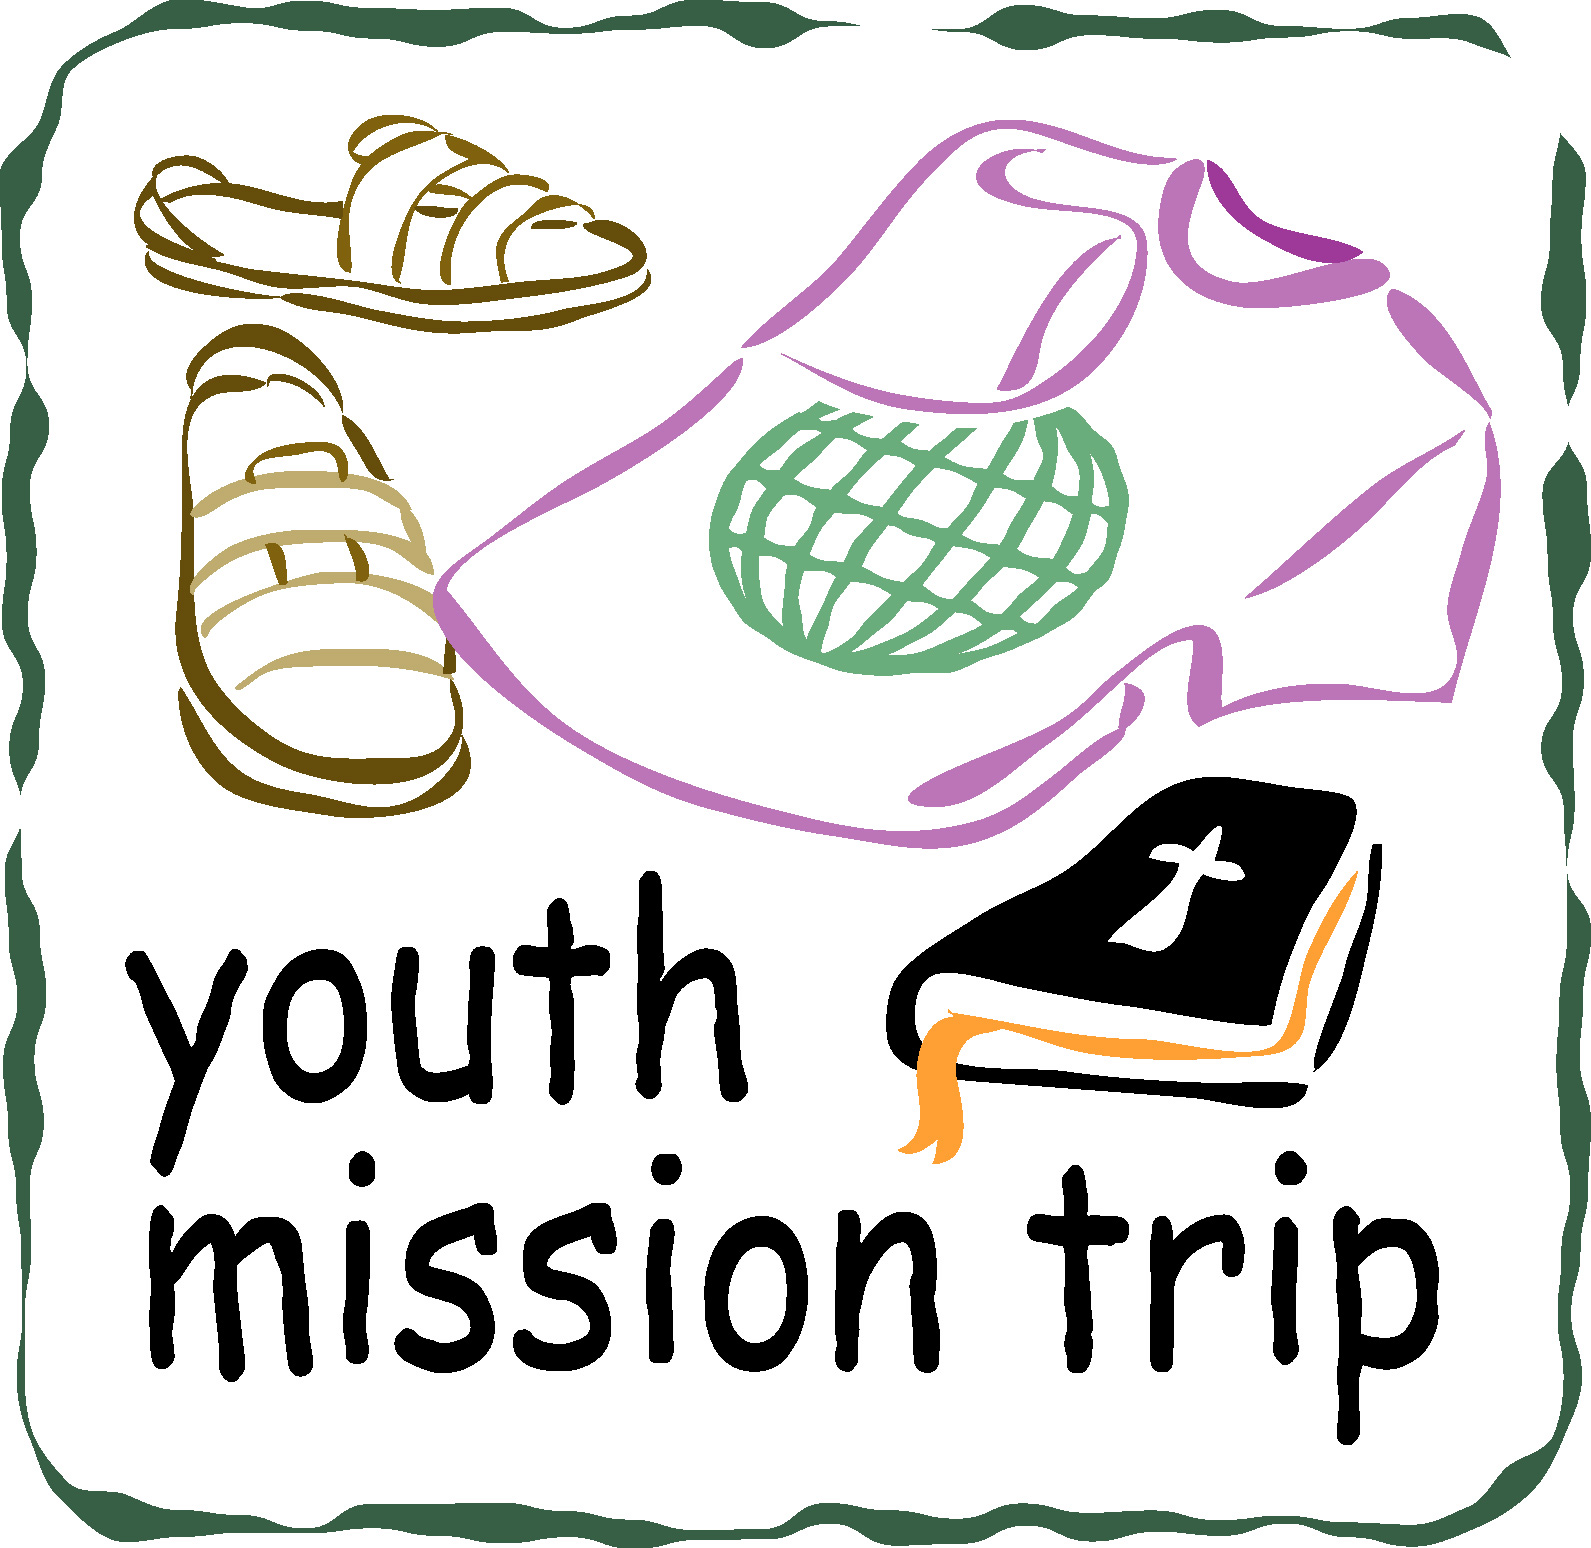 Why We Send Our Youth On Mission Trips   Joe Iovino